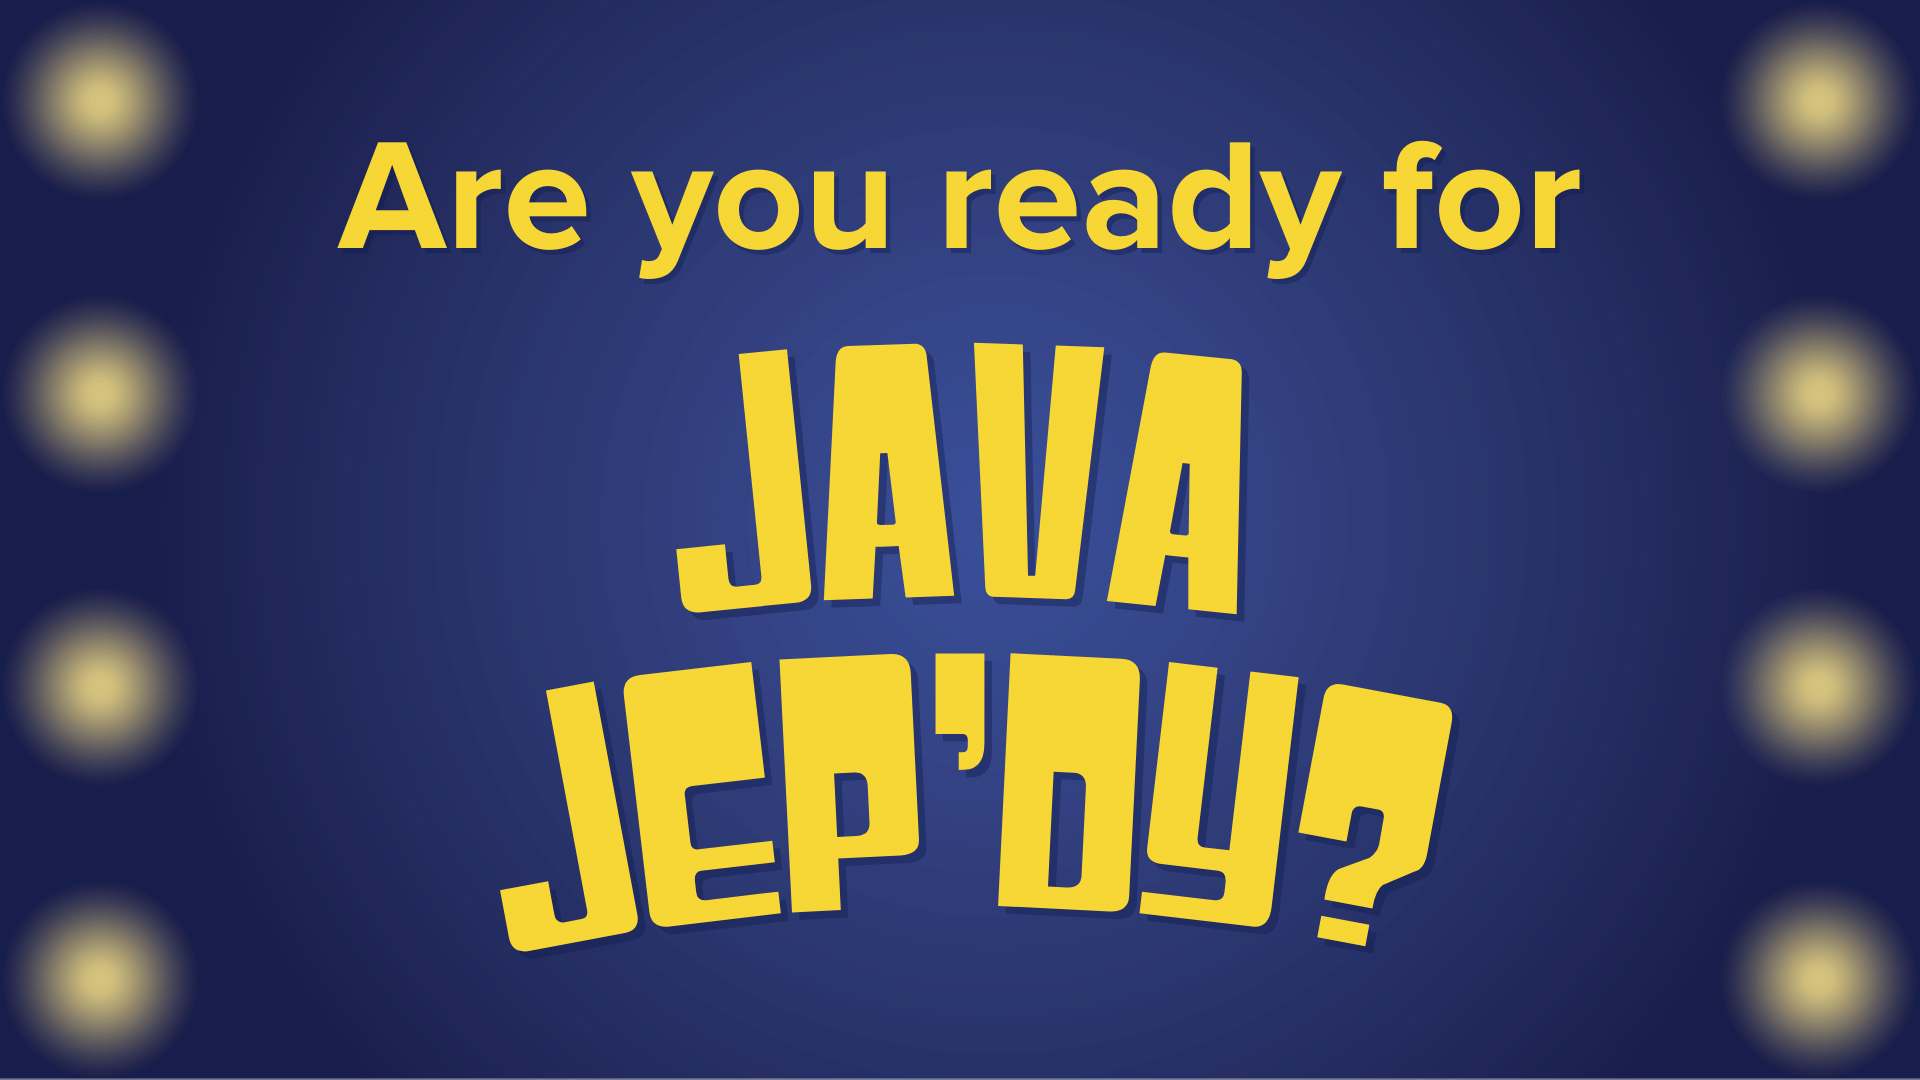 are you ready for Java JEP'dy?